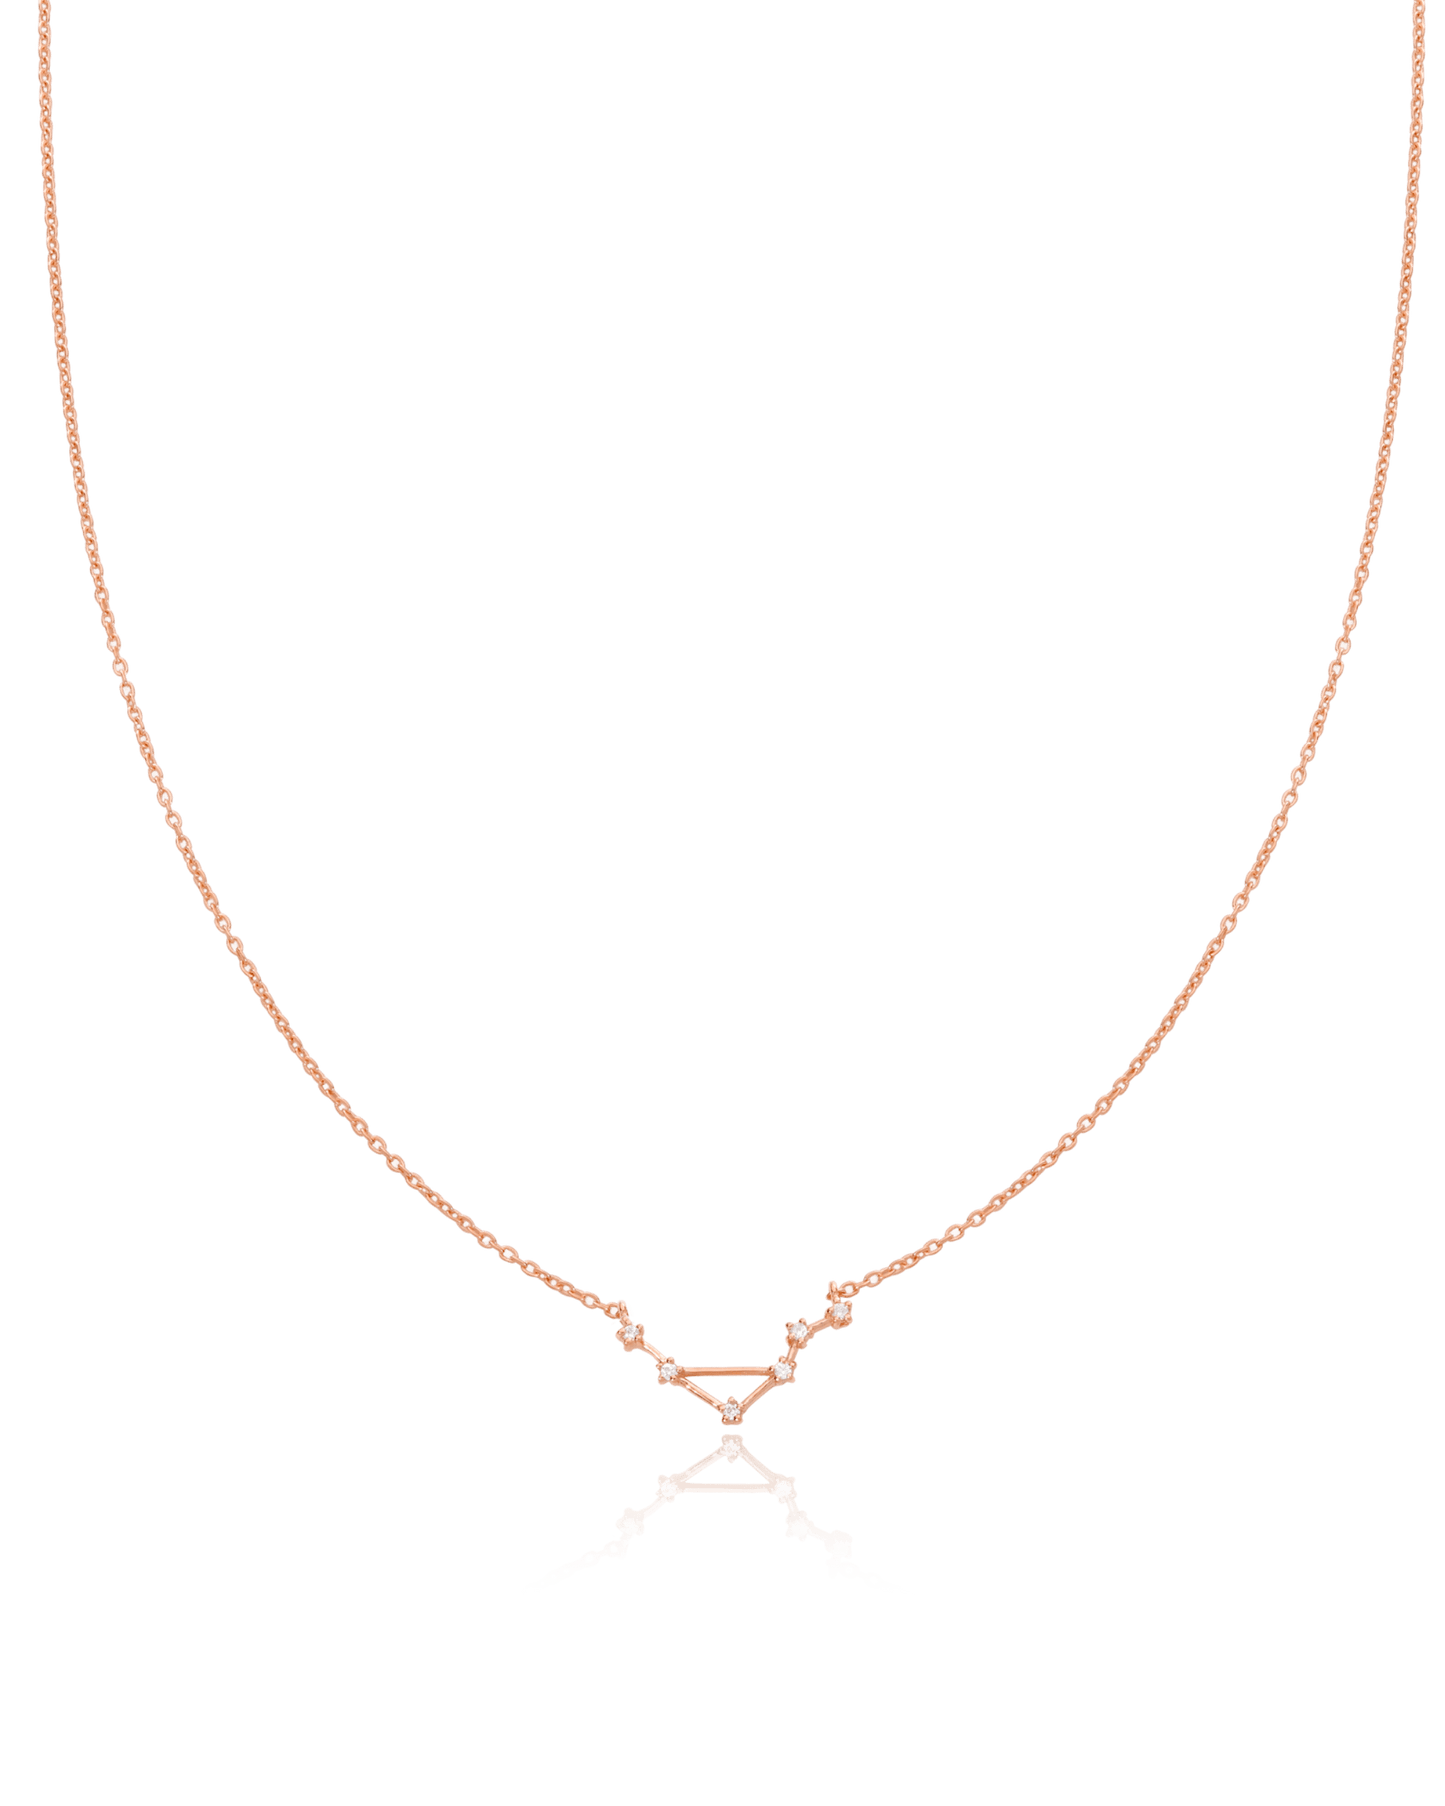 Constellation Necklace with Diamonds - 925 Sterling Silver Necklaces magal-dev 